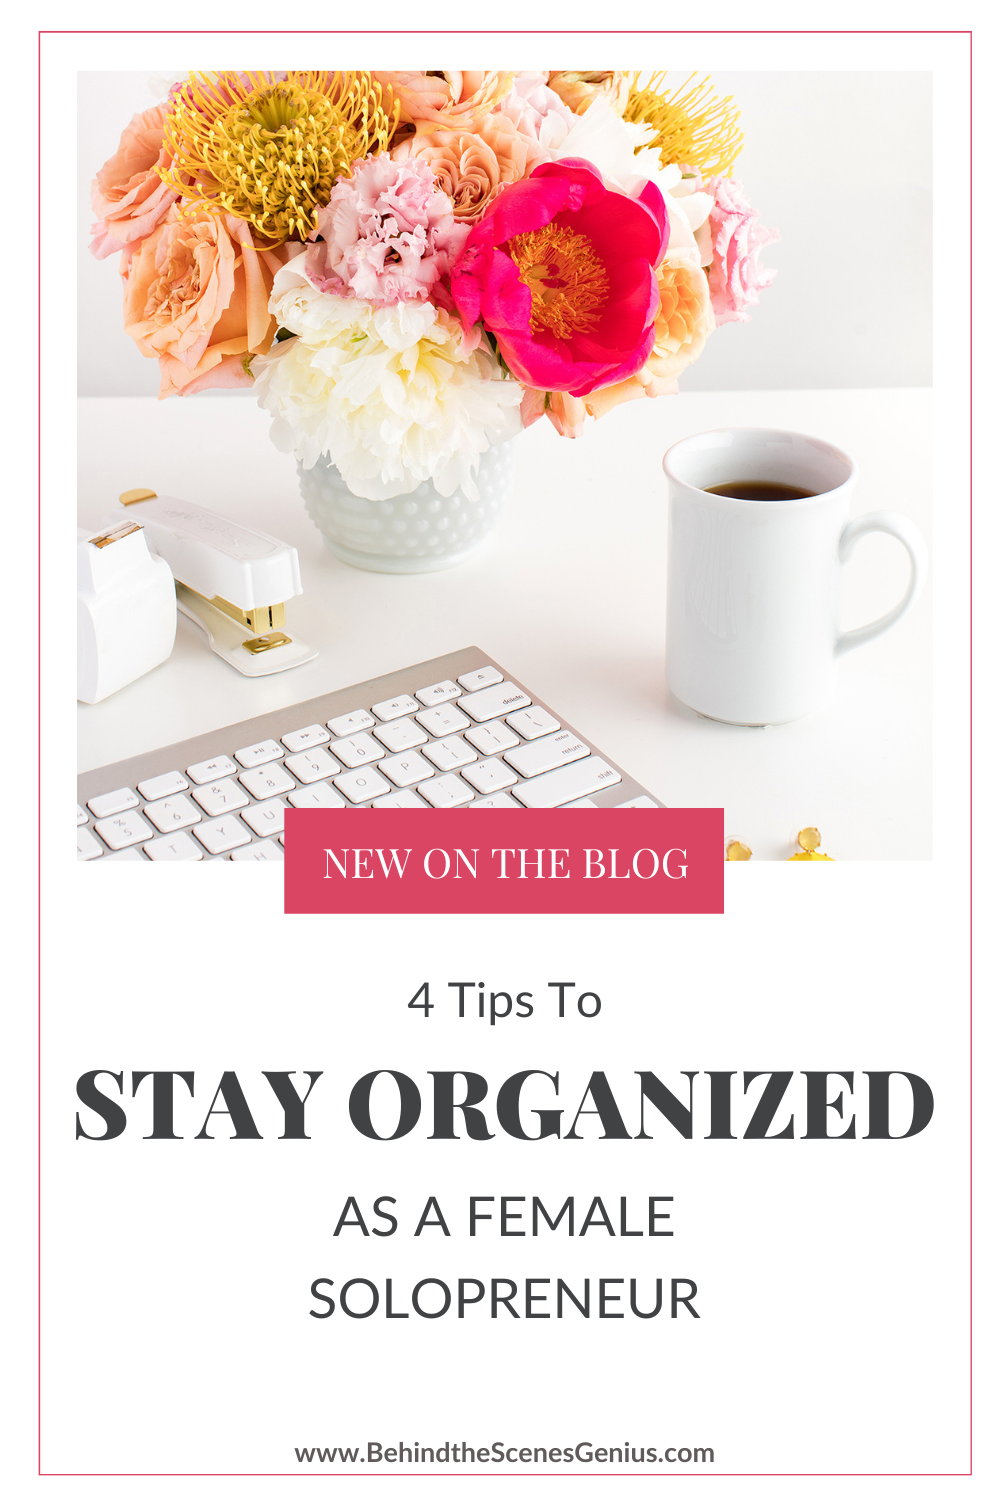 Tips to Stay Organized as a Female Solopreneur